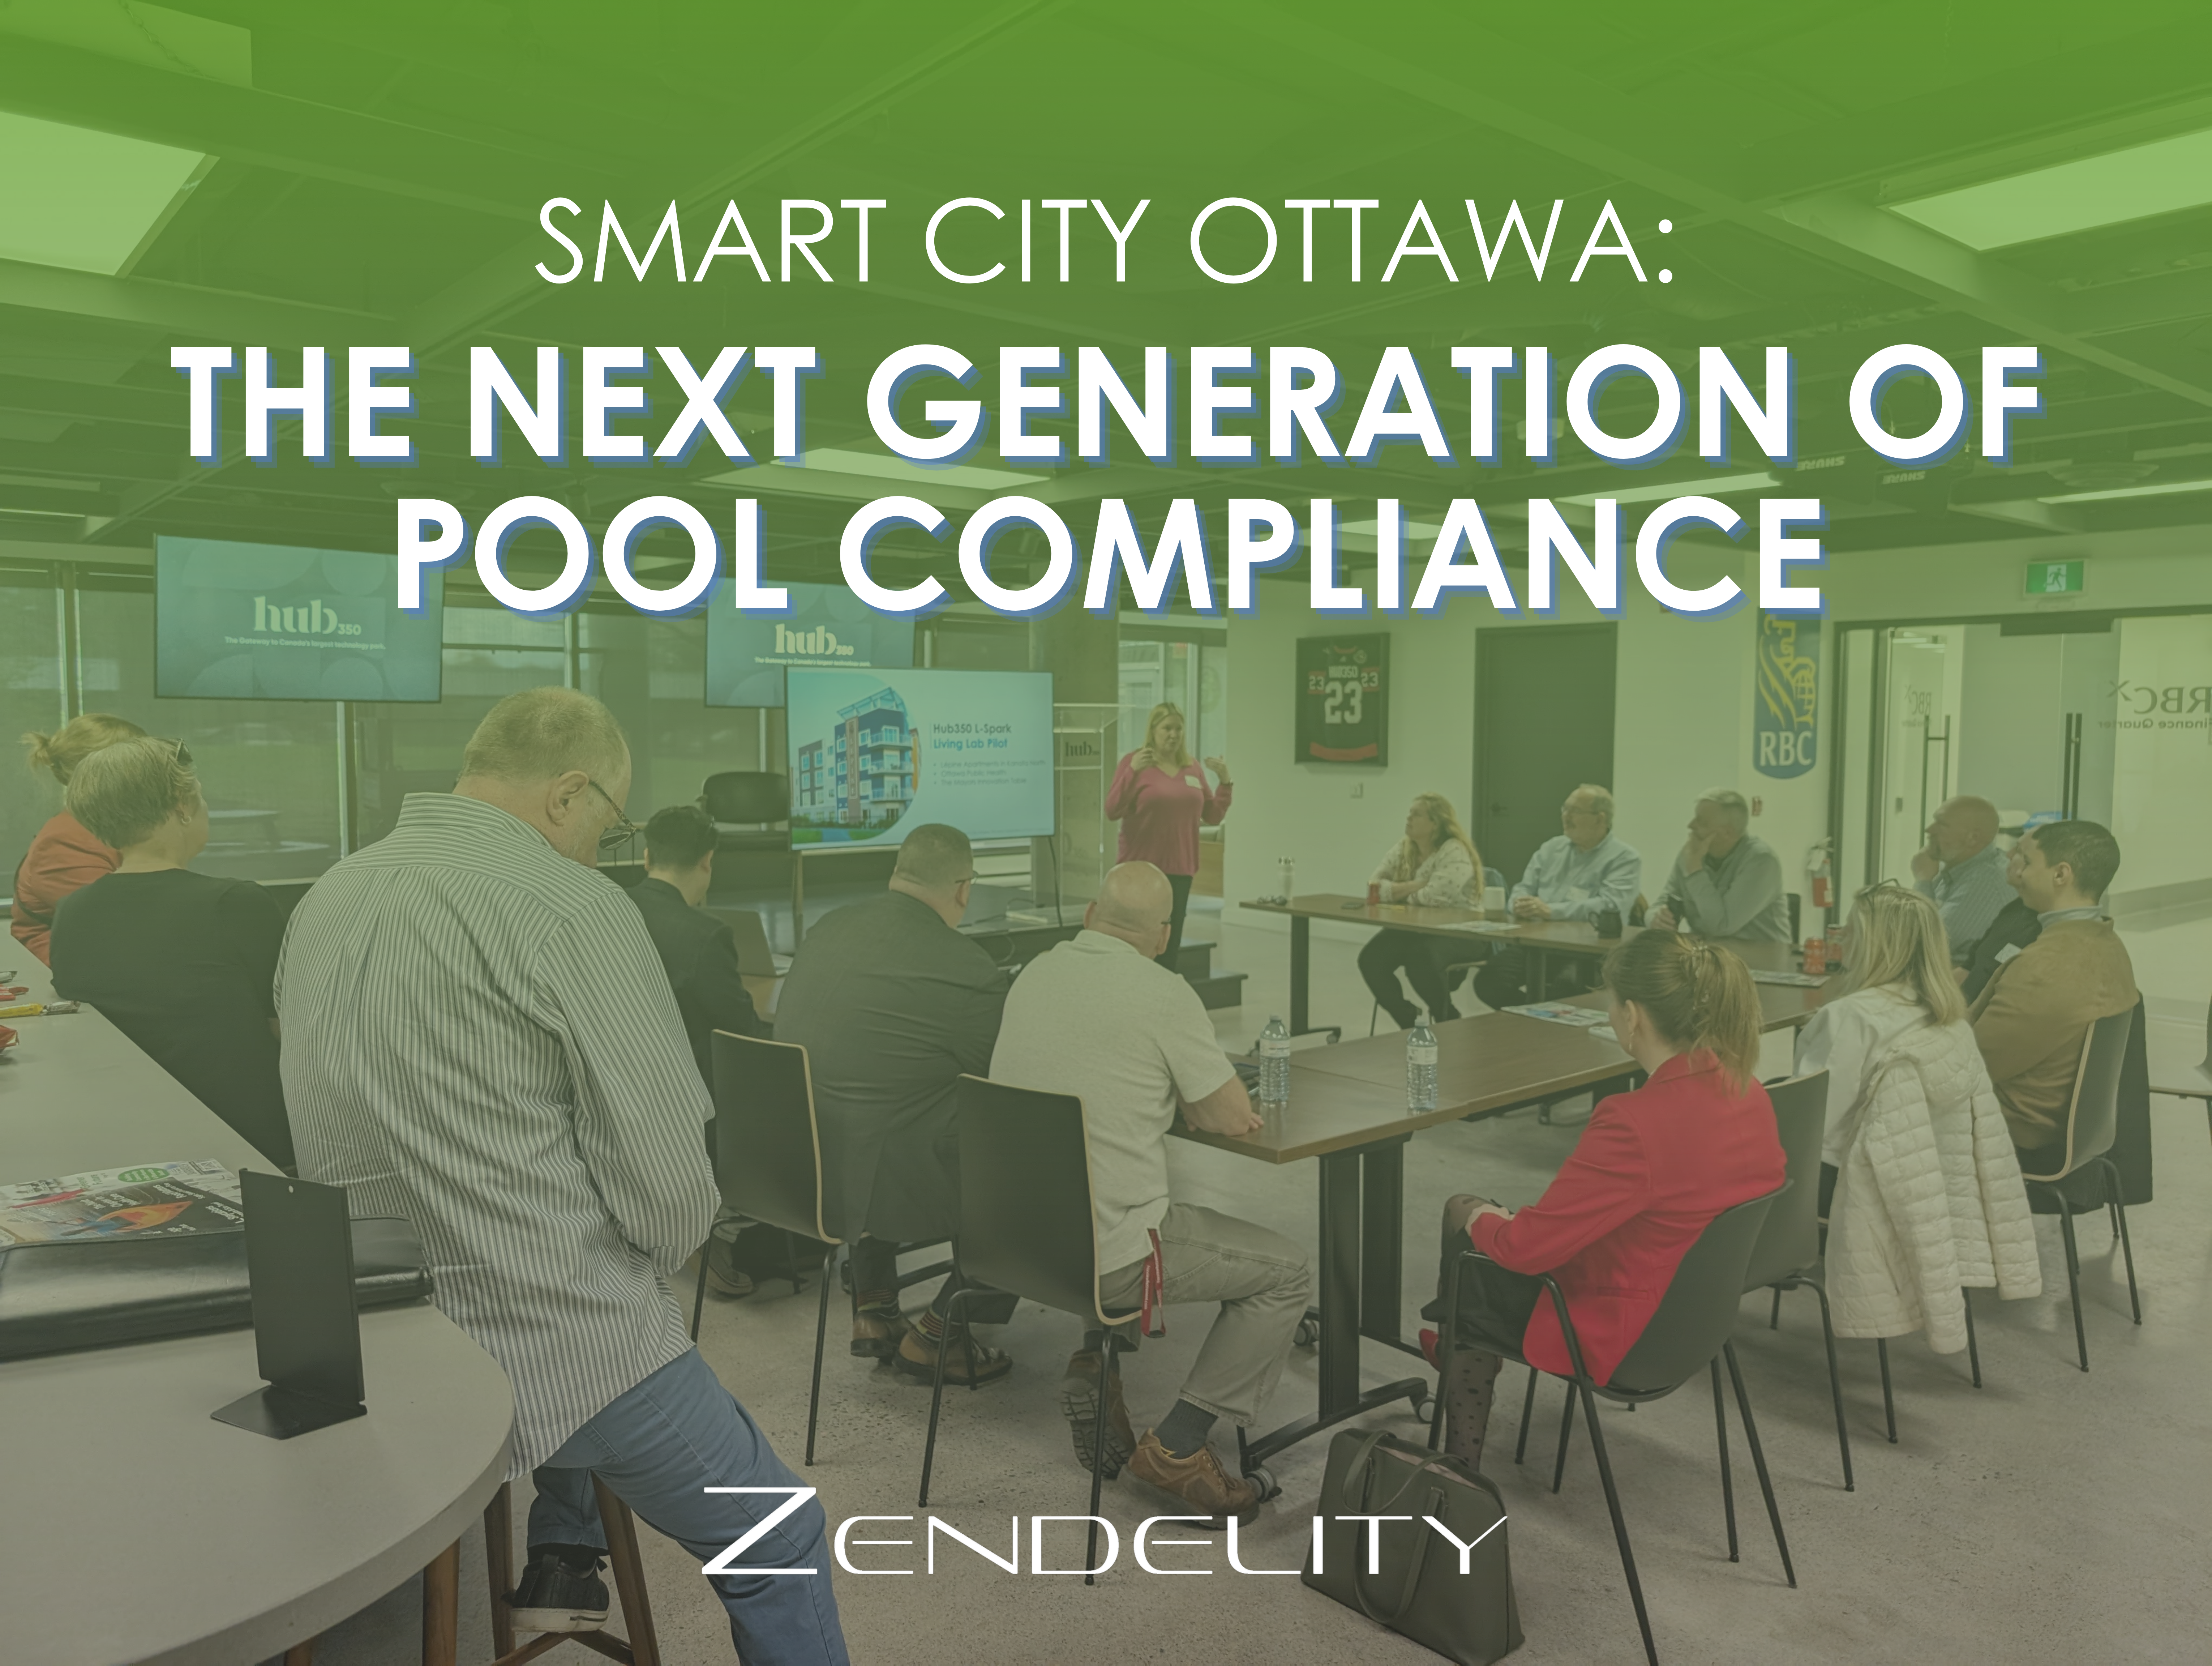 Poster for Zendelity's event: Smart City Ottawa: The Next Generation of Pool Compliance. The text is overlayed on a green gradient, with a background image of people gathering at Hub350's RBCx FQ.